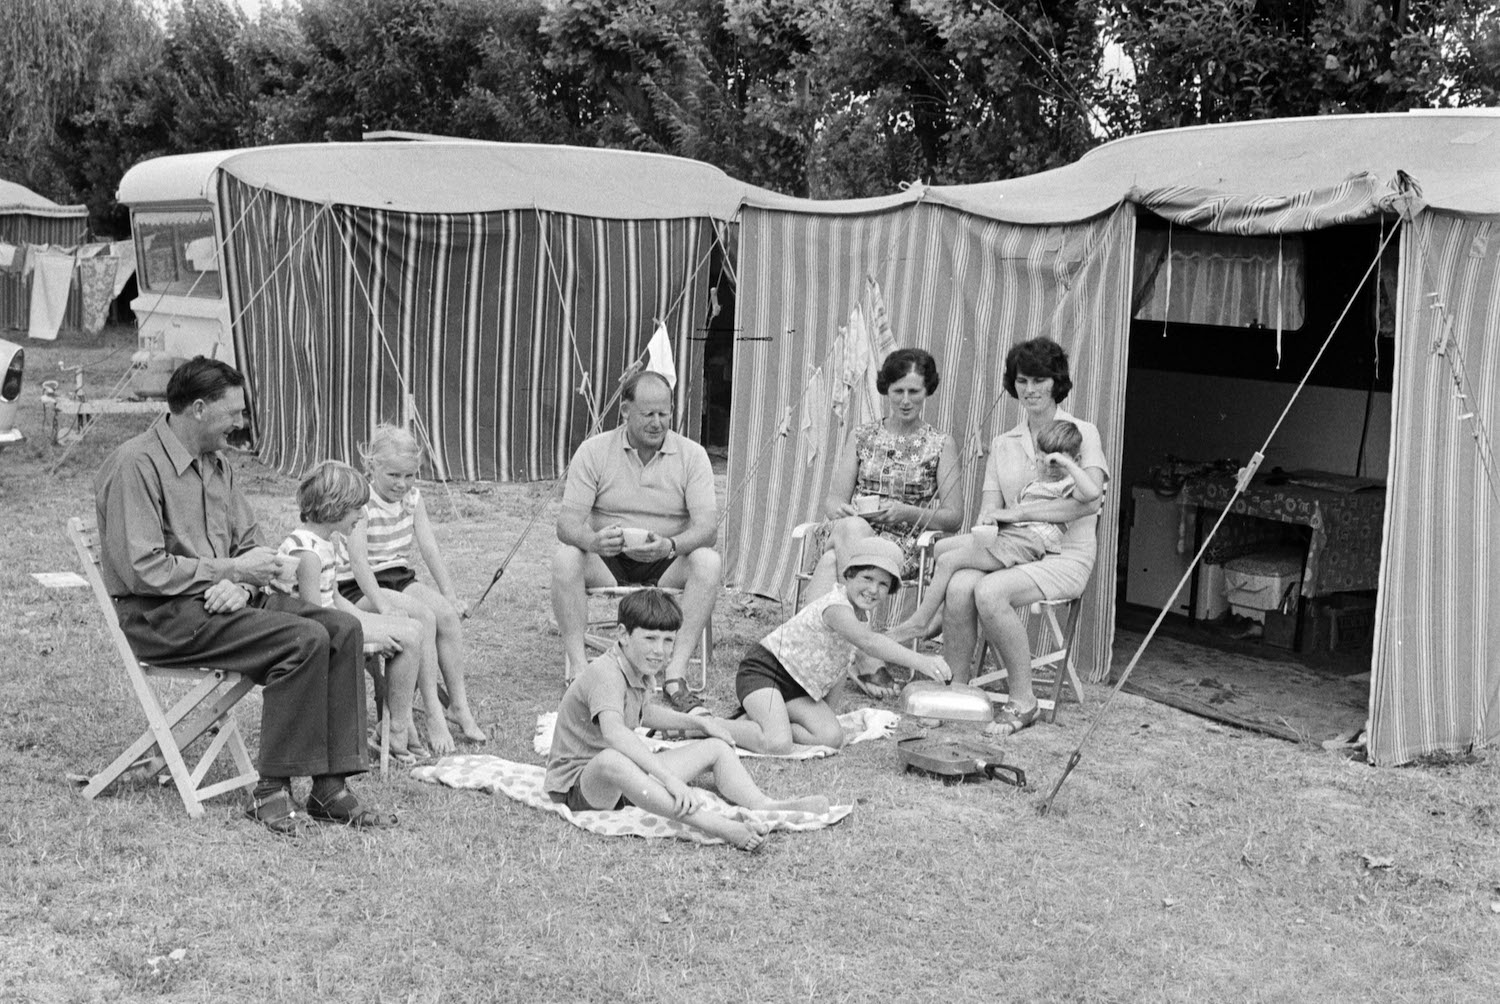 First campers, Tahuna Motor Camp, December 1971. Nelson Provincial Museum, Geoffrey C Wood Collection: 7819_fr3